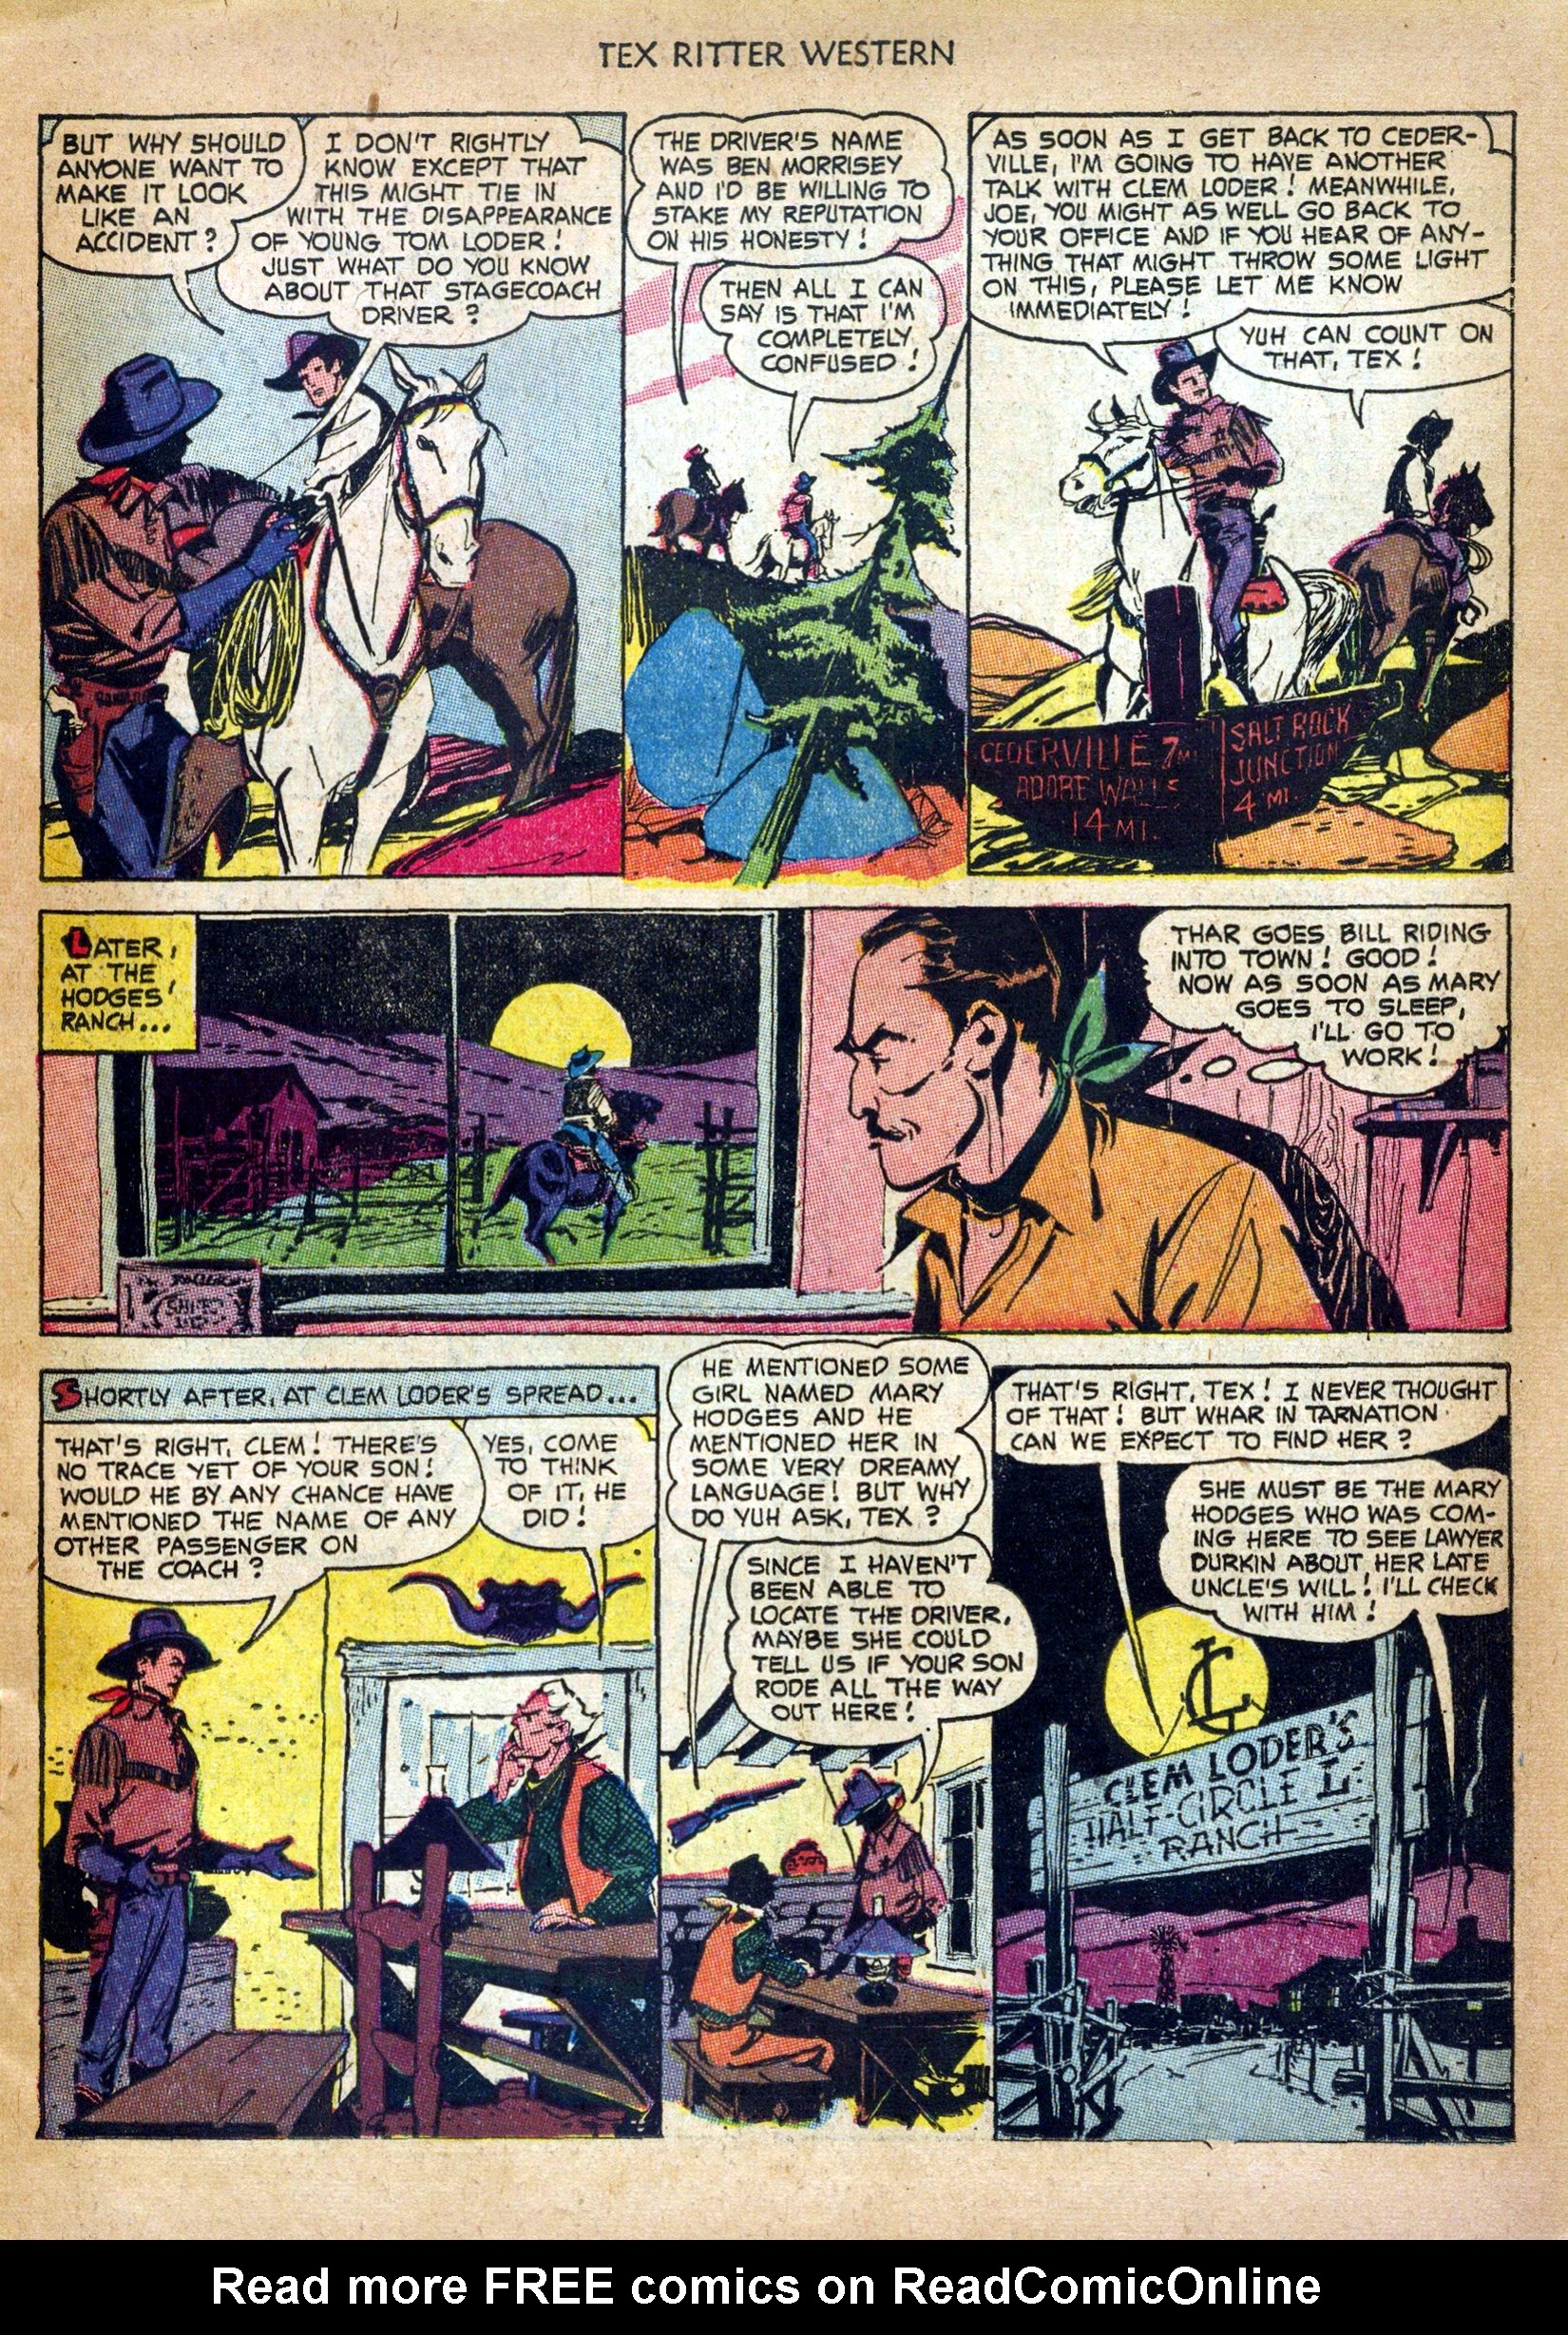 Read online Tex Ritter Western comic -  Issue #18 - 11